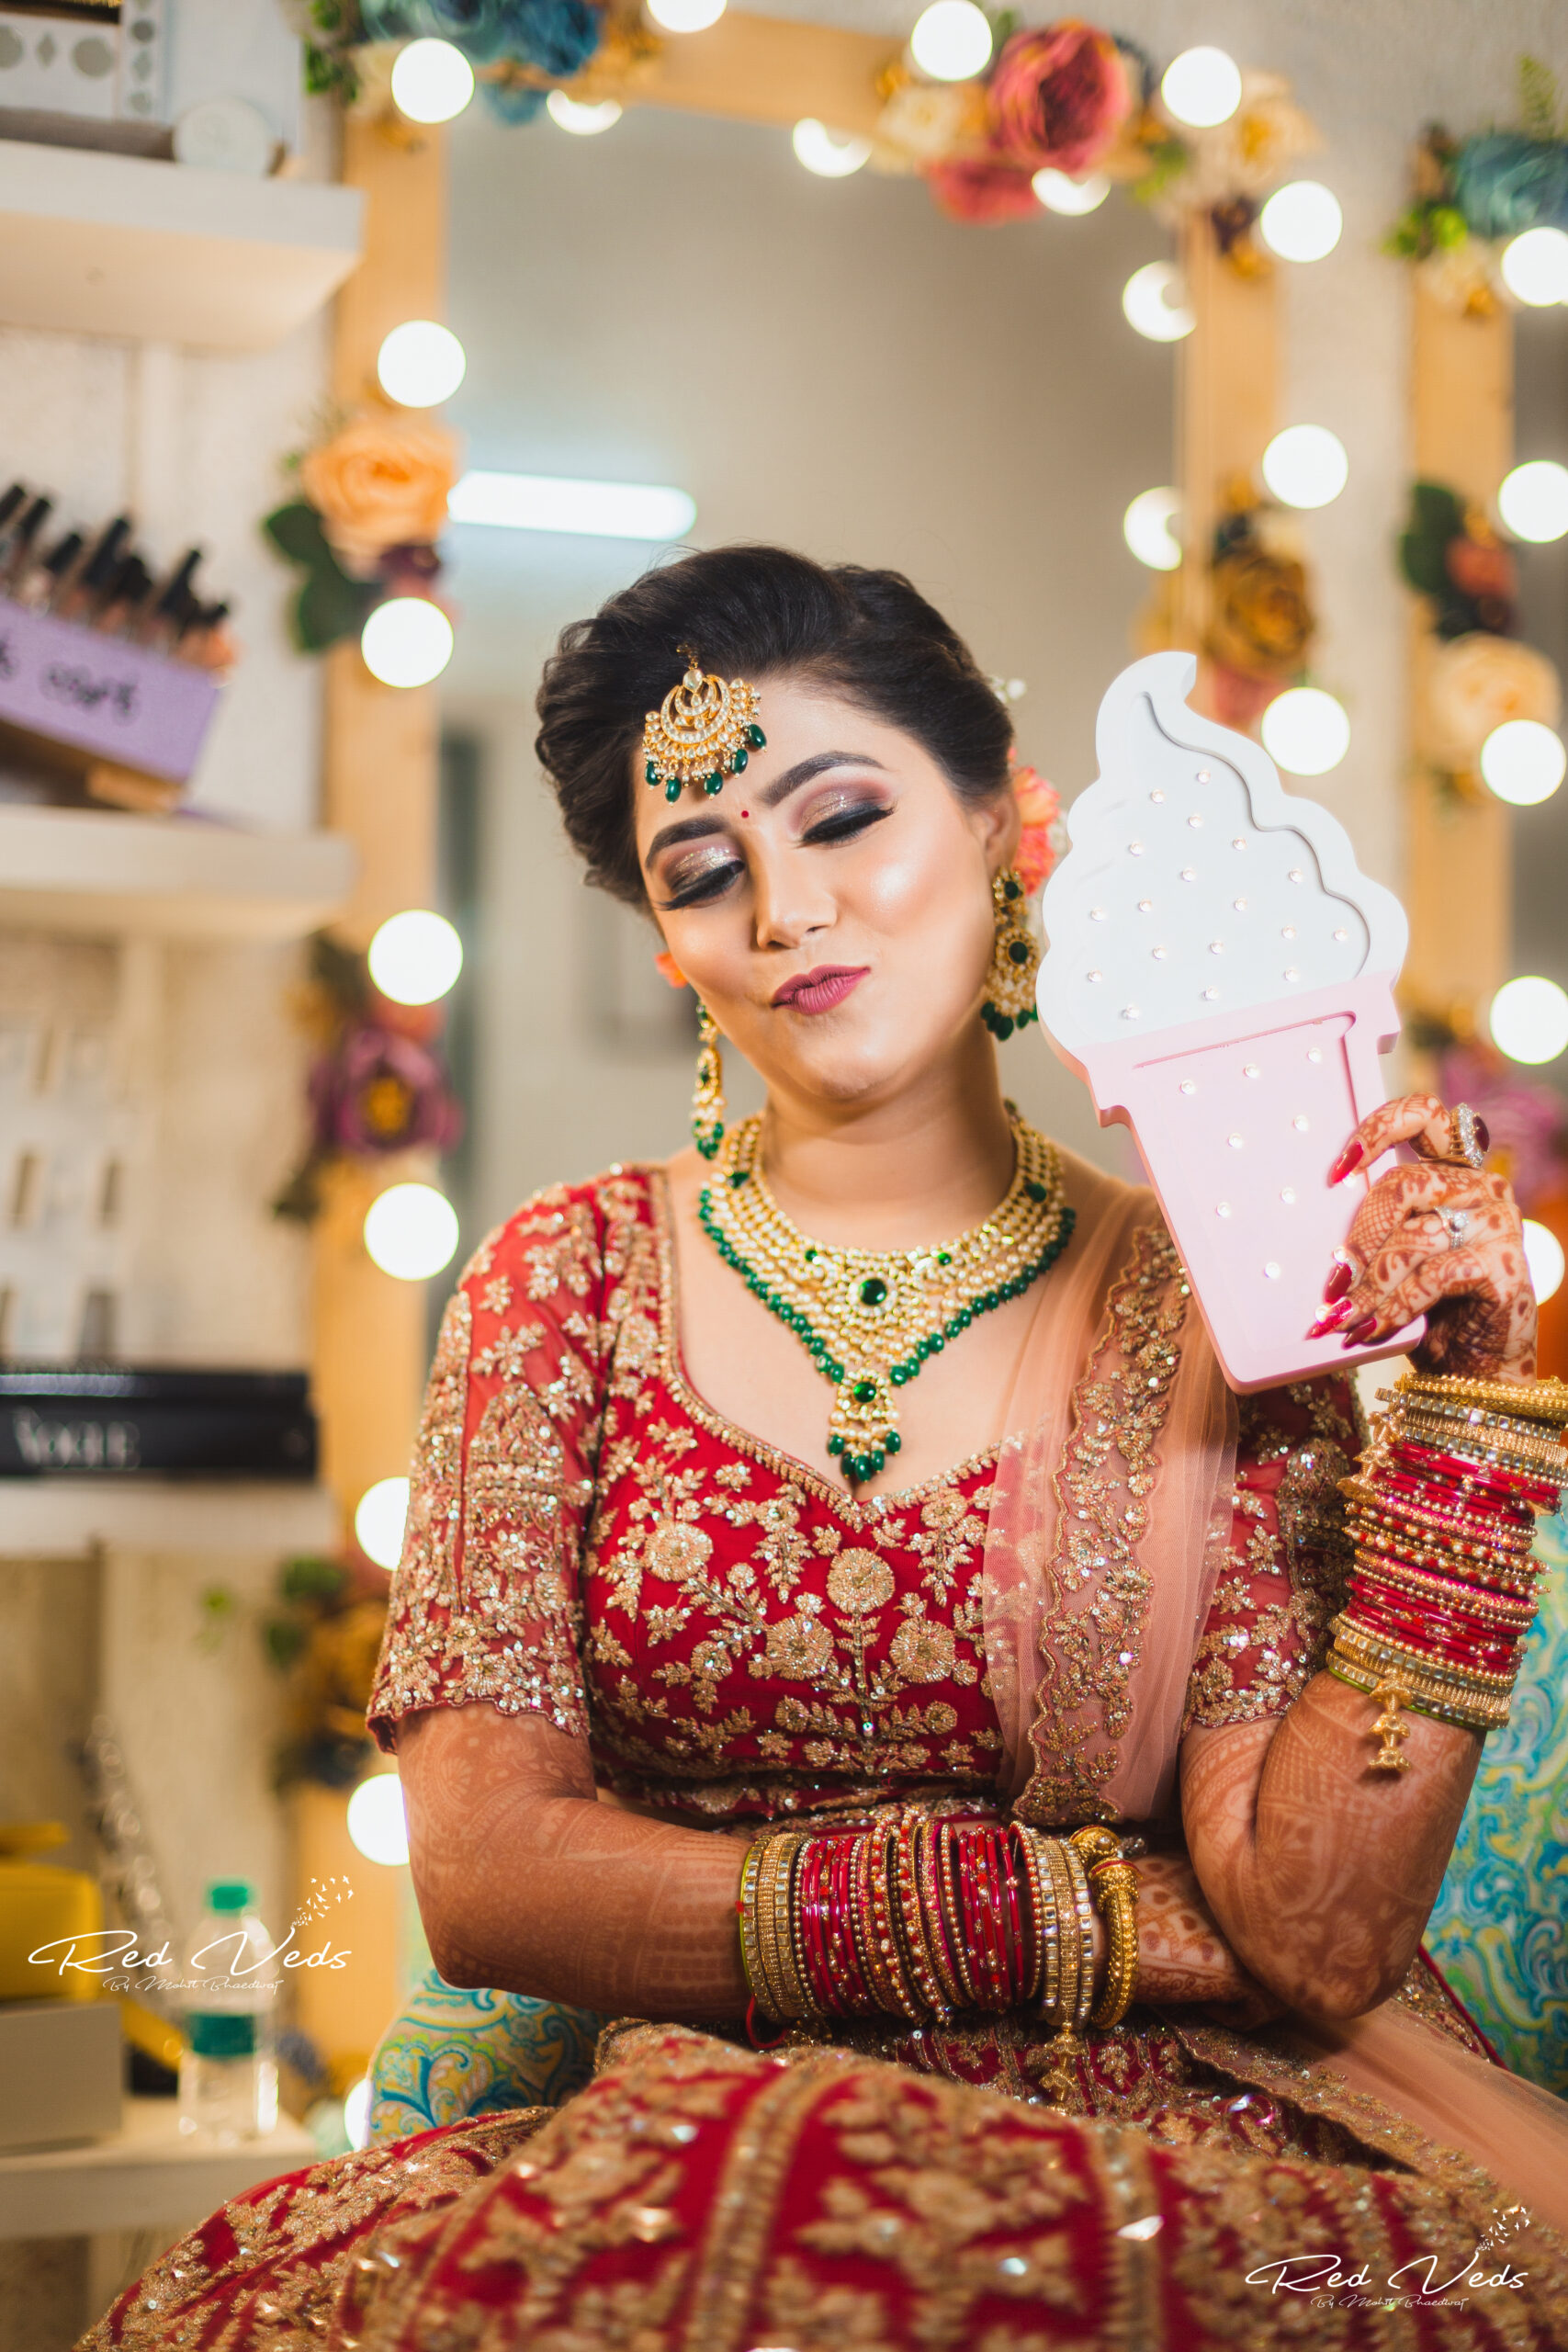 Top 6 Remarkable Poses For Wedding Photographs – India's Wedding Blog